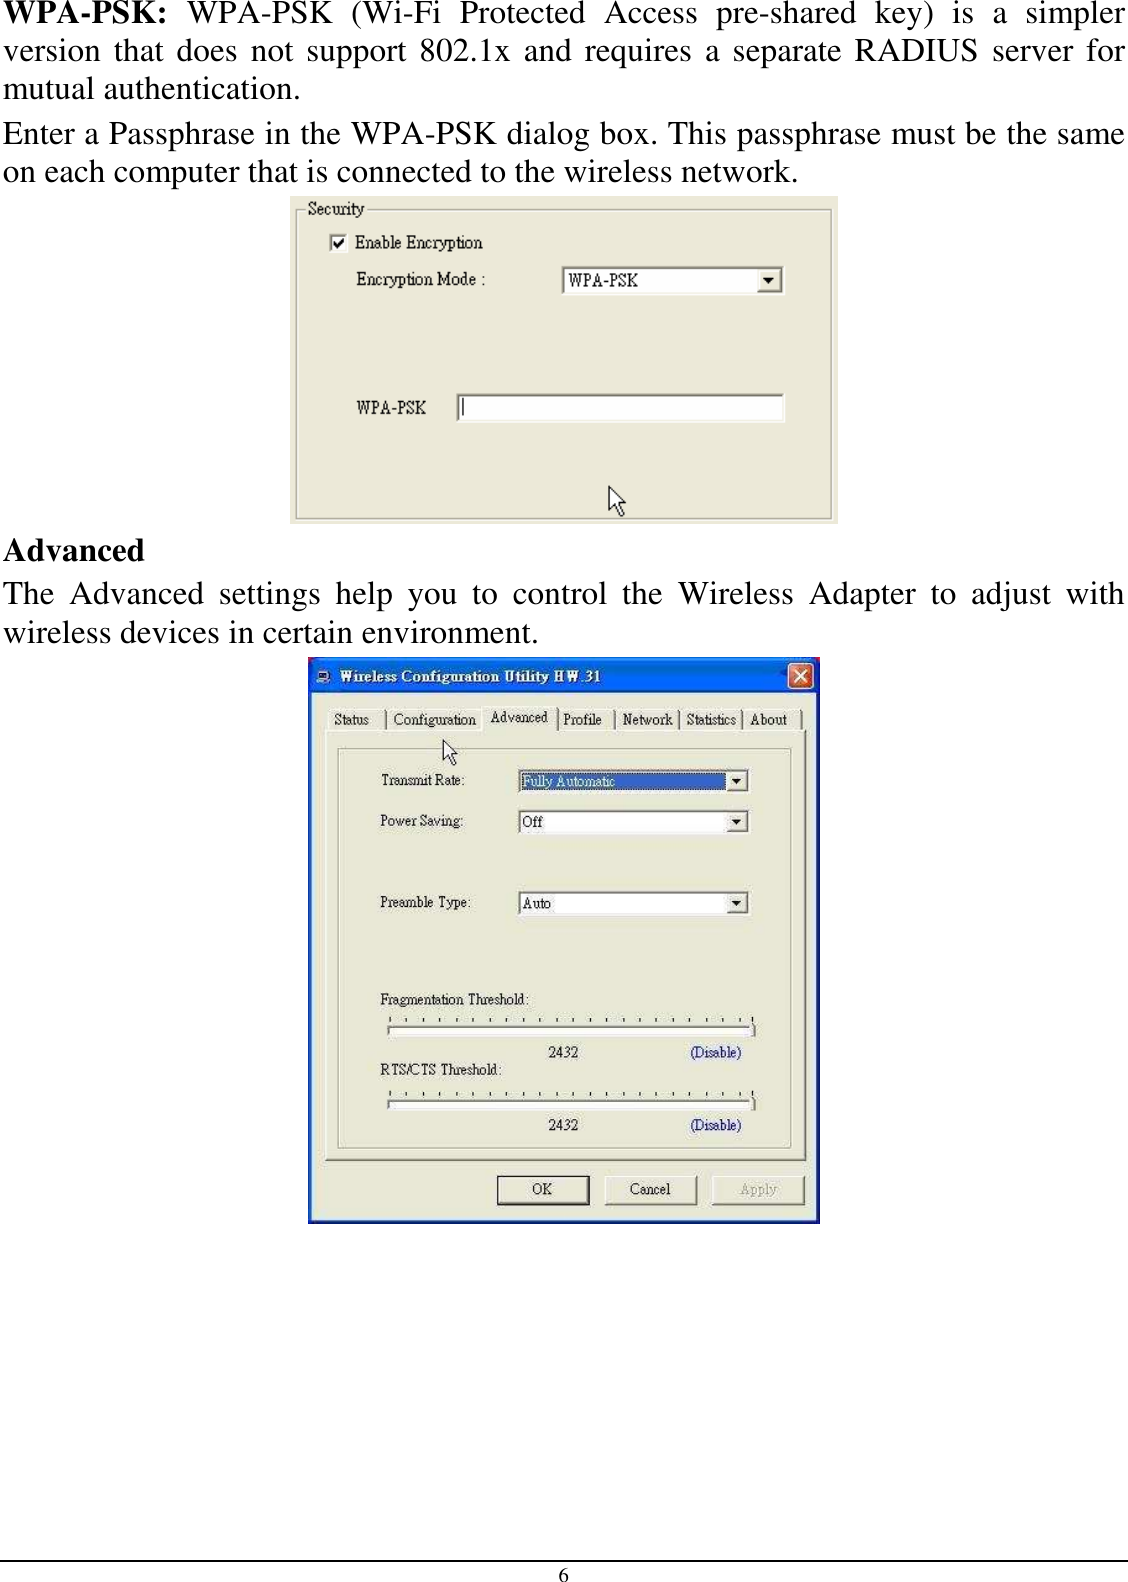 6 WPA-PSK:  WPA-PSK  (Wi-Fi  Protected  Access  pre-shared  key)  is  a  simpler version that does not support 802.1x and requires a separate RADIUS  server for mutual authentication. Enter a Passphrase in the WPA-PSK dialog box. This passphrase must be the same on each computer that is connected to the wireless network.  Advanced The  Advanced  settings  help  you  to  control  the  Wireless  Adapter  to  adjust  with wireless devices in certain environment.  